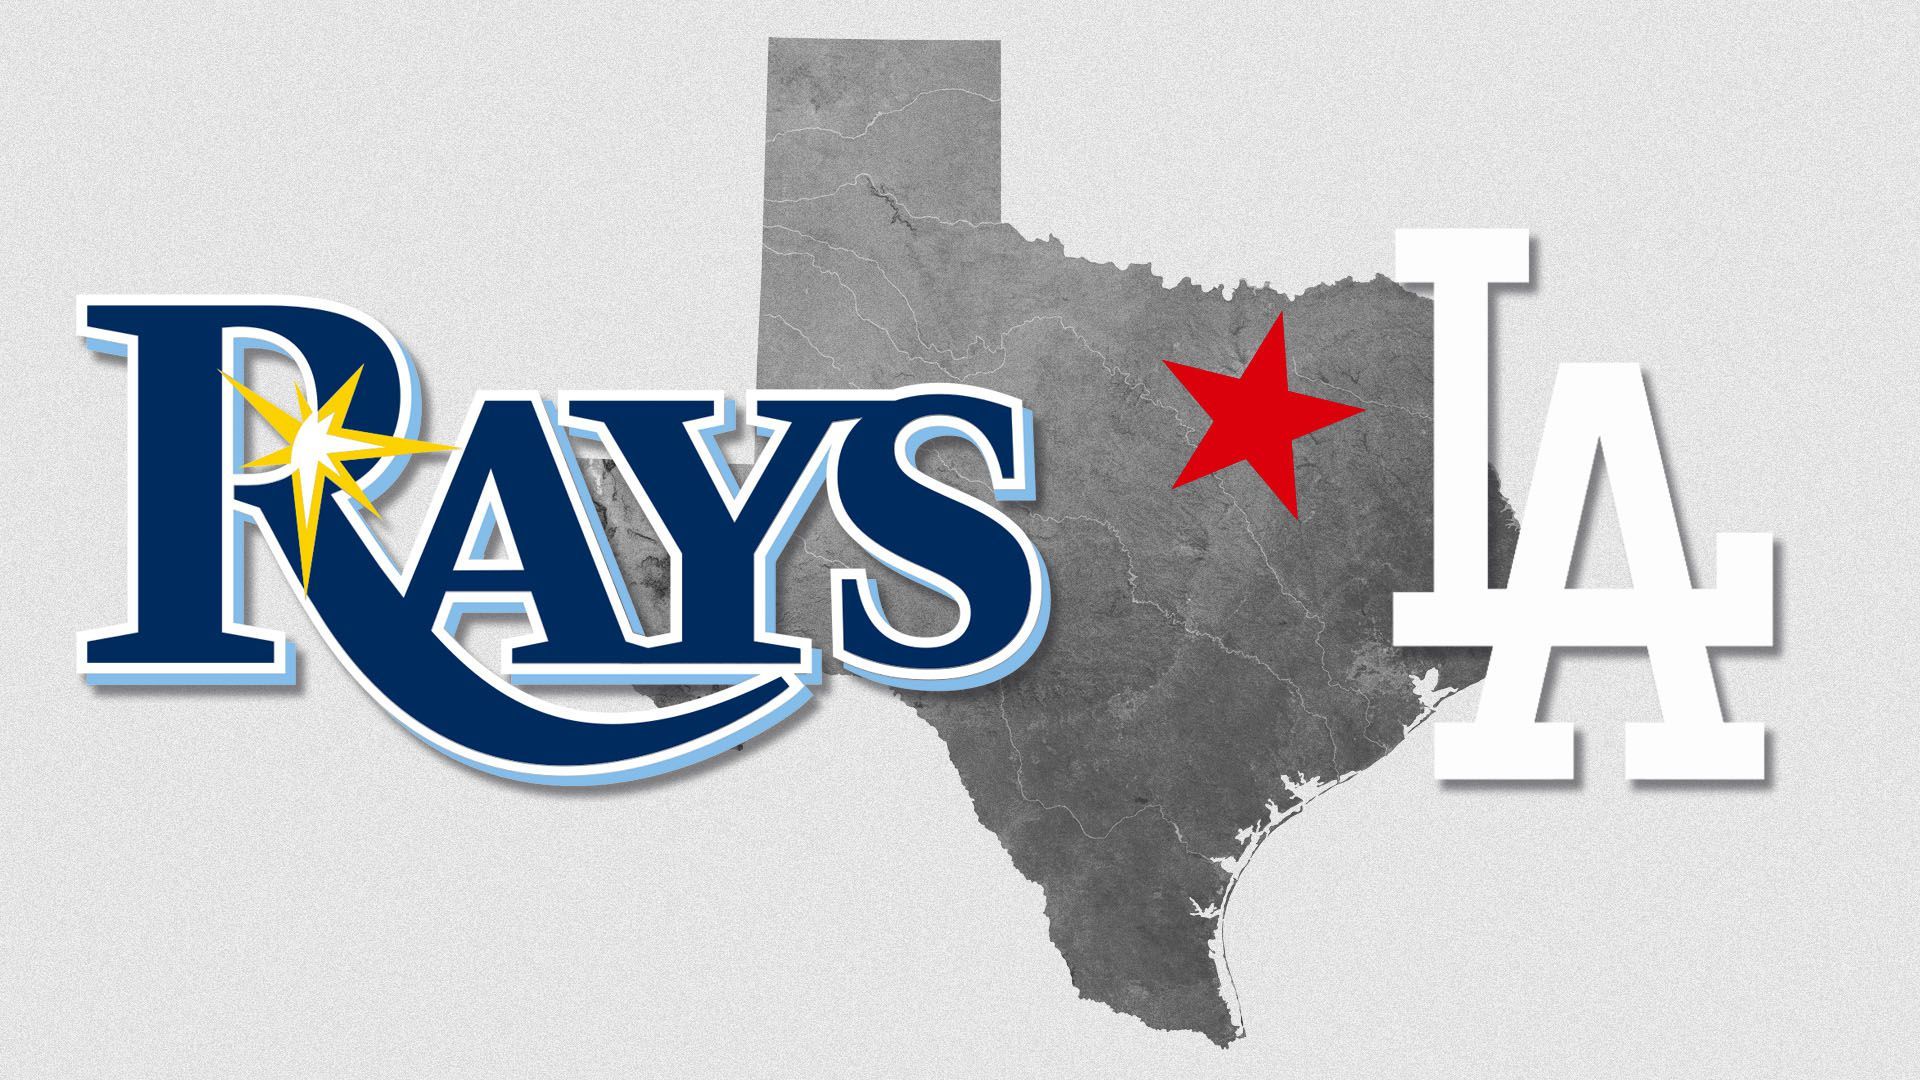 Illustration of the Rays and the Dodgers logos over a topographical map of Texas